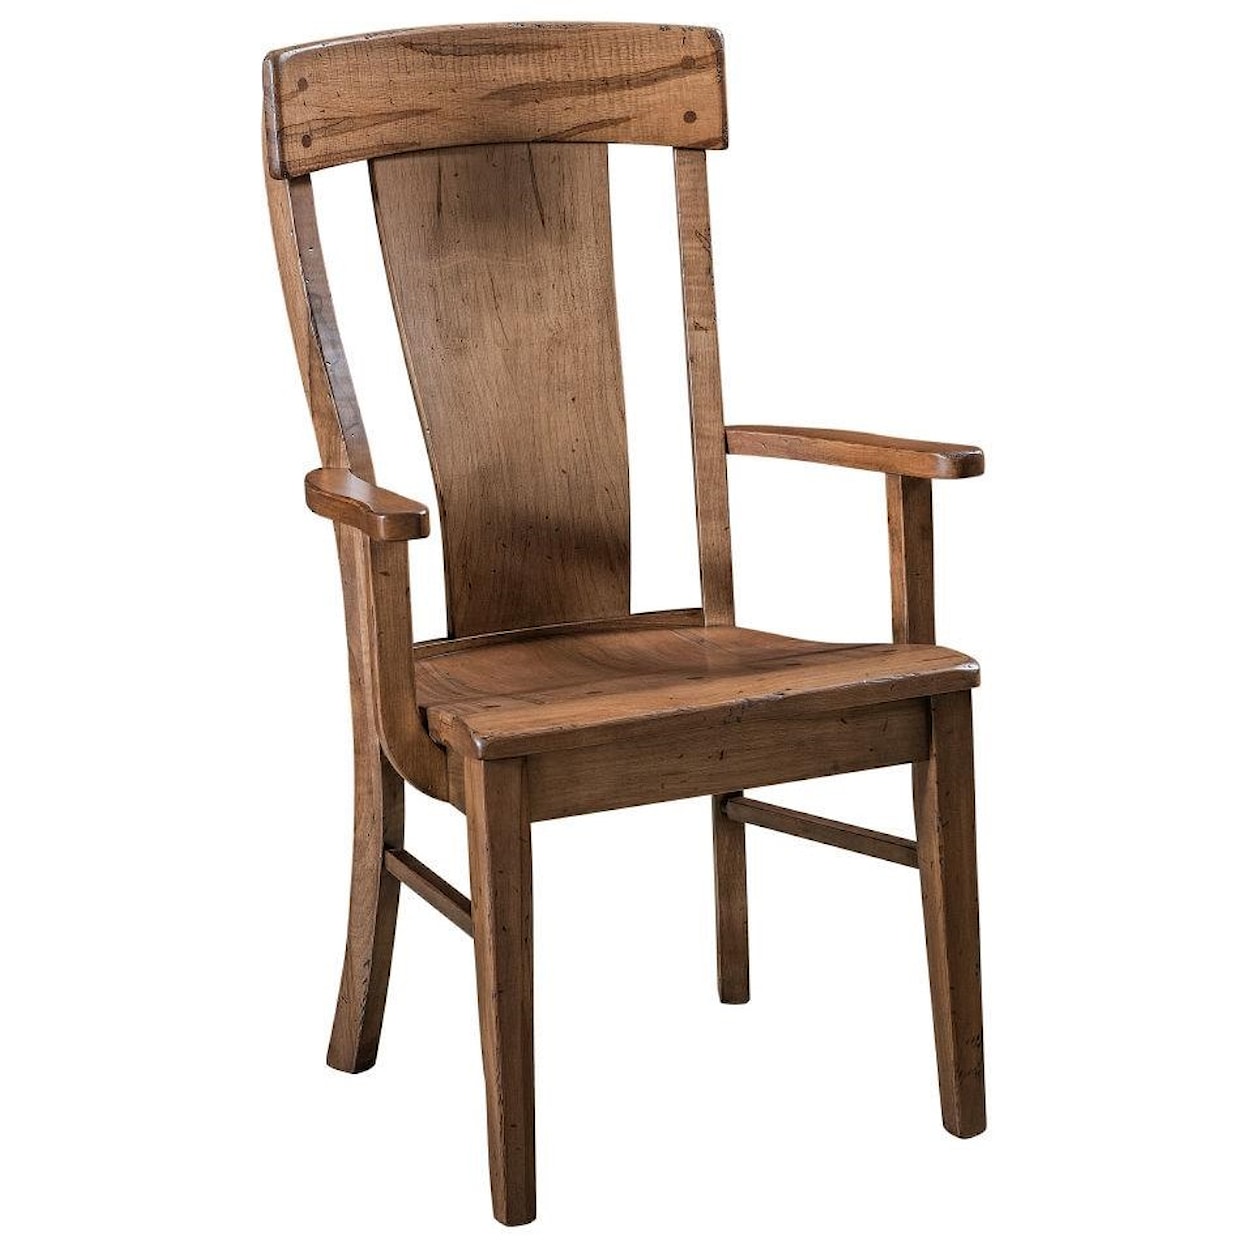 F&N Woodworking Lacombe Arm Chair